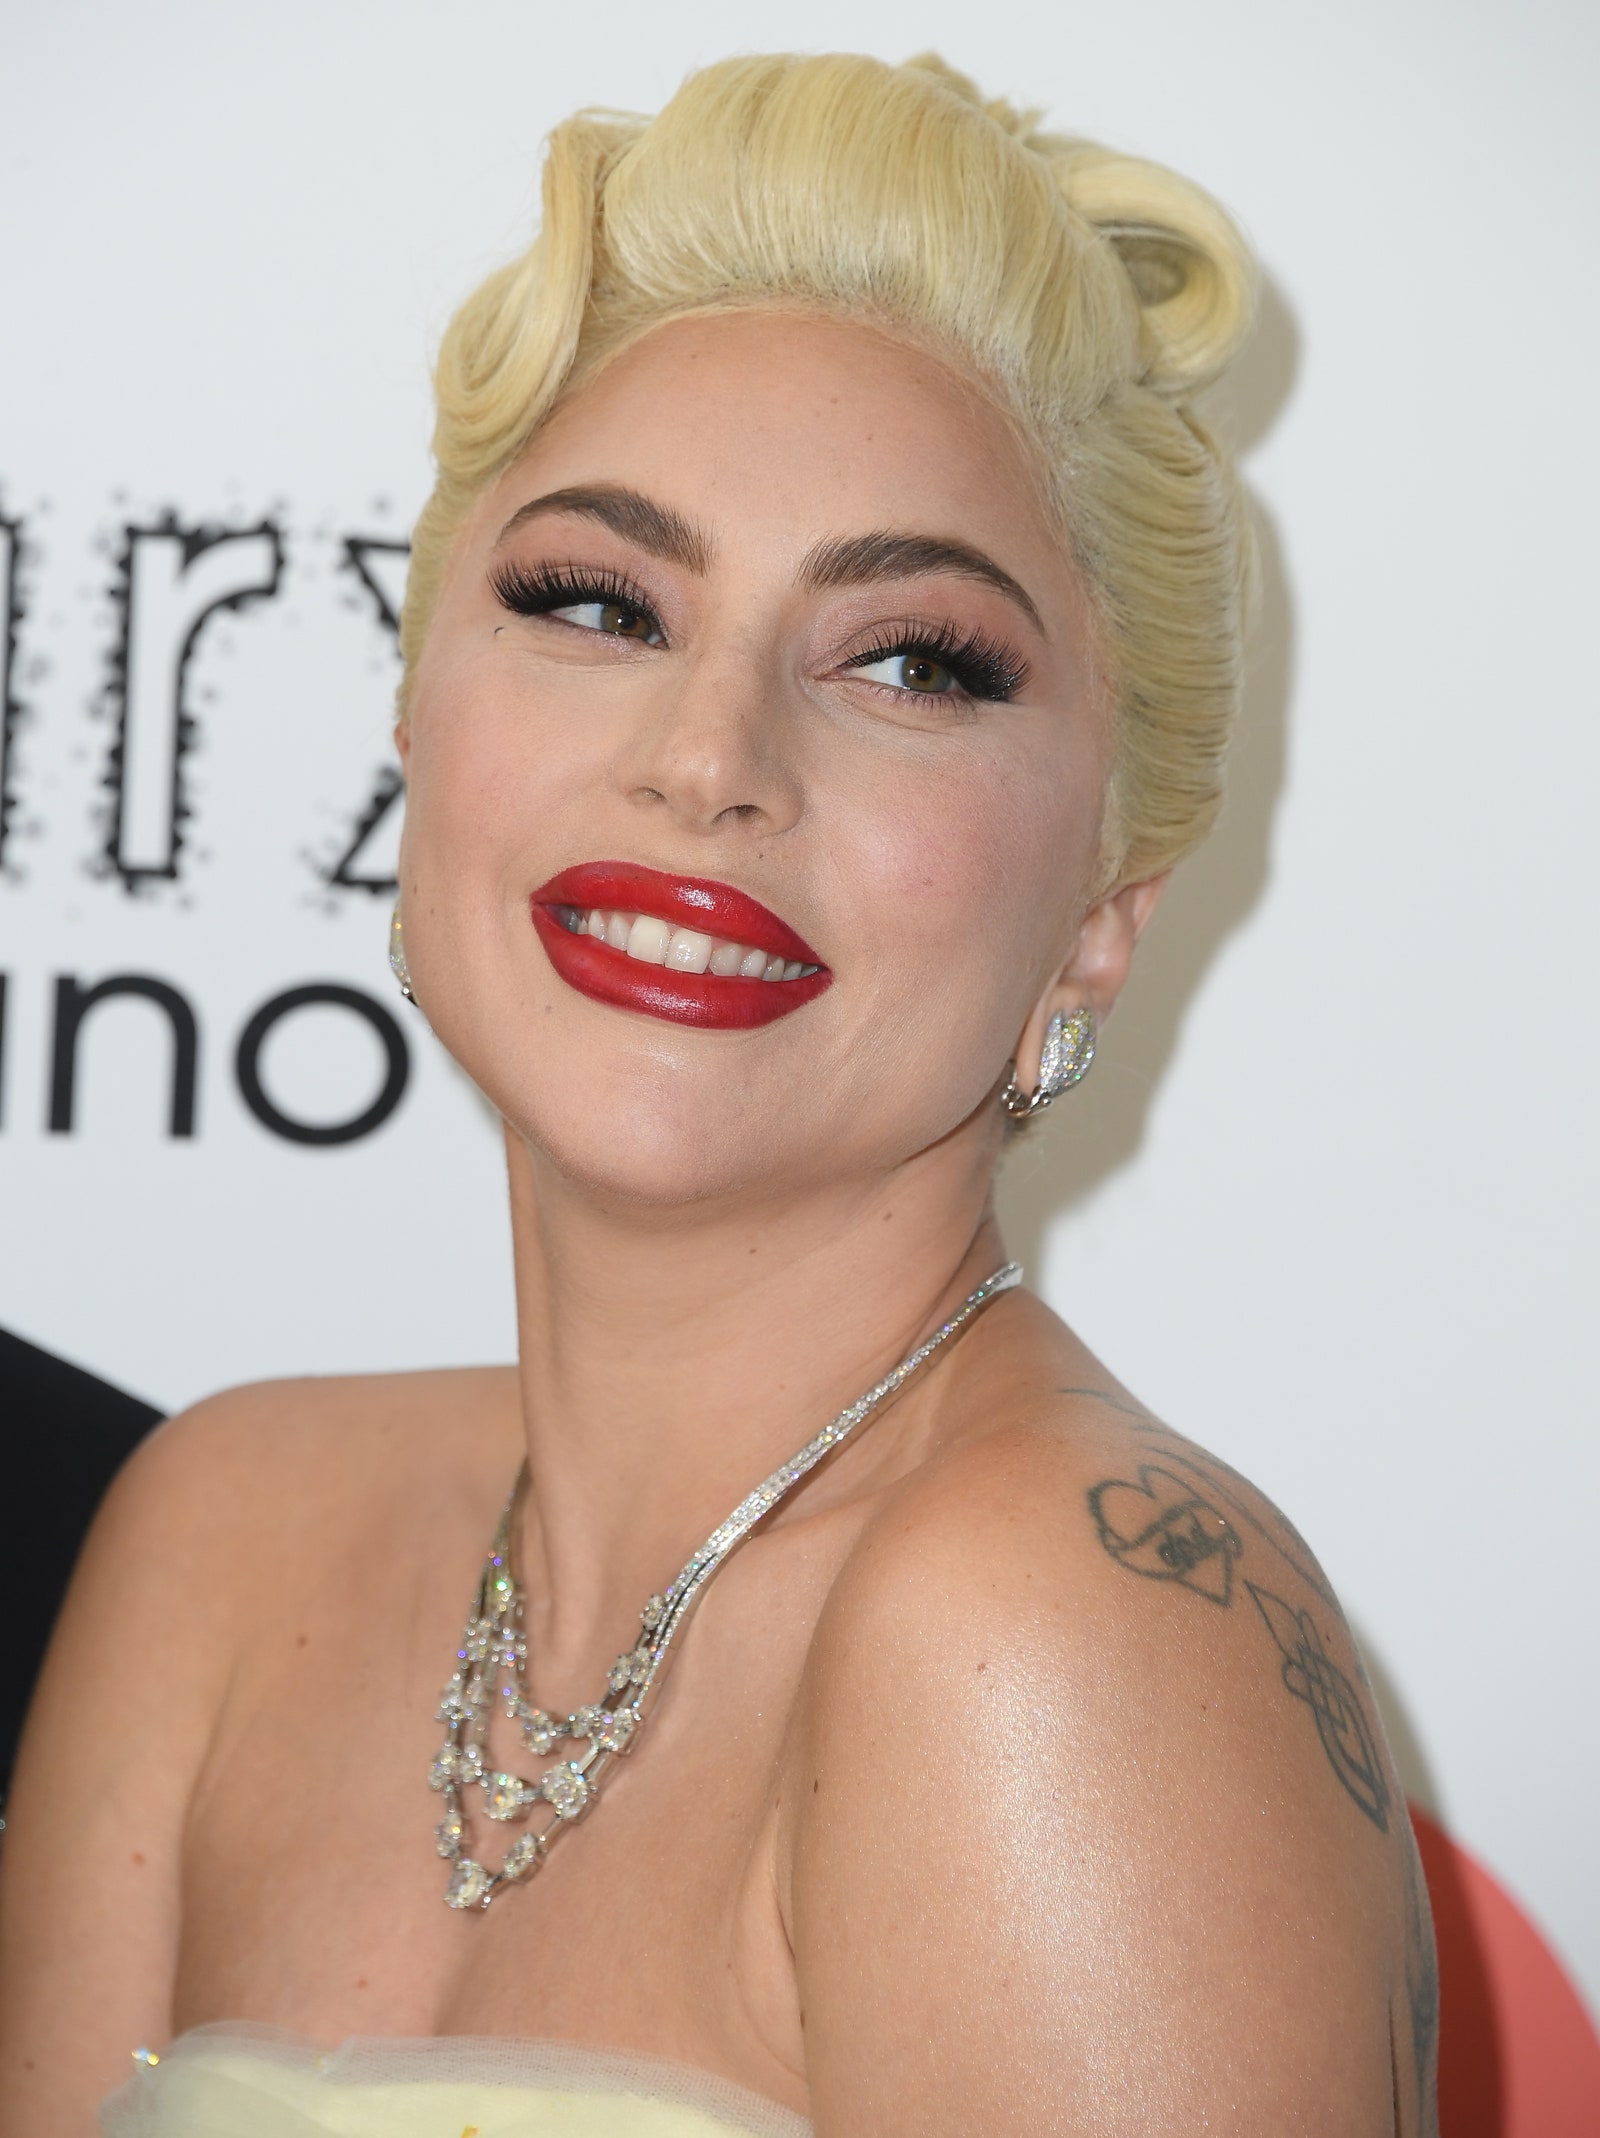 Lady Gaga arrives at the Elton John AIDS Foundation's 30th Annual Academy Awards Viewing Party